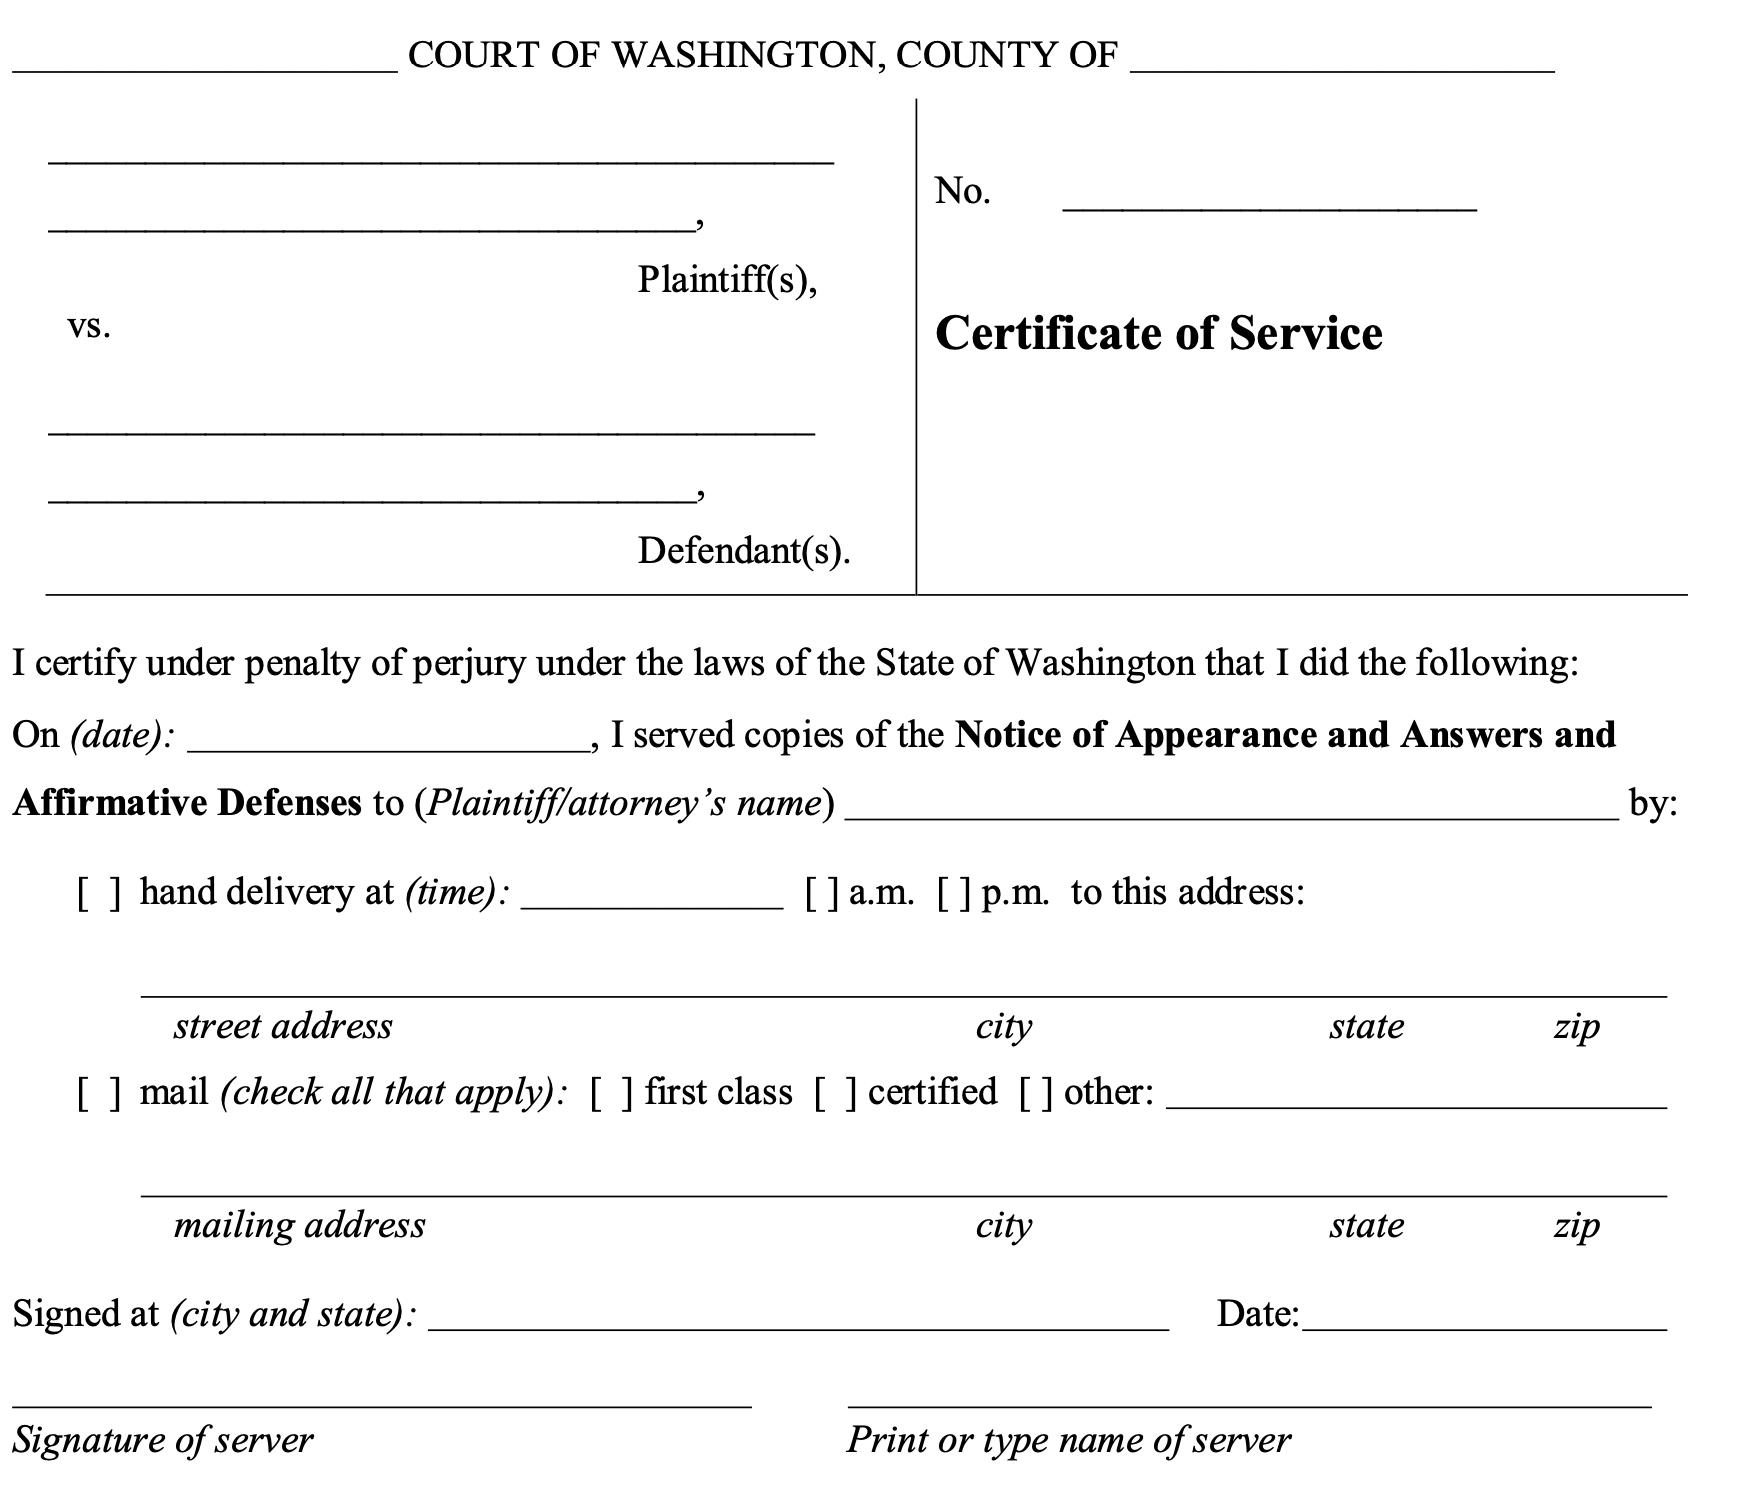 Image of a blank Washington Certificate of Service Form